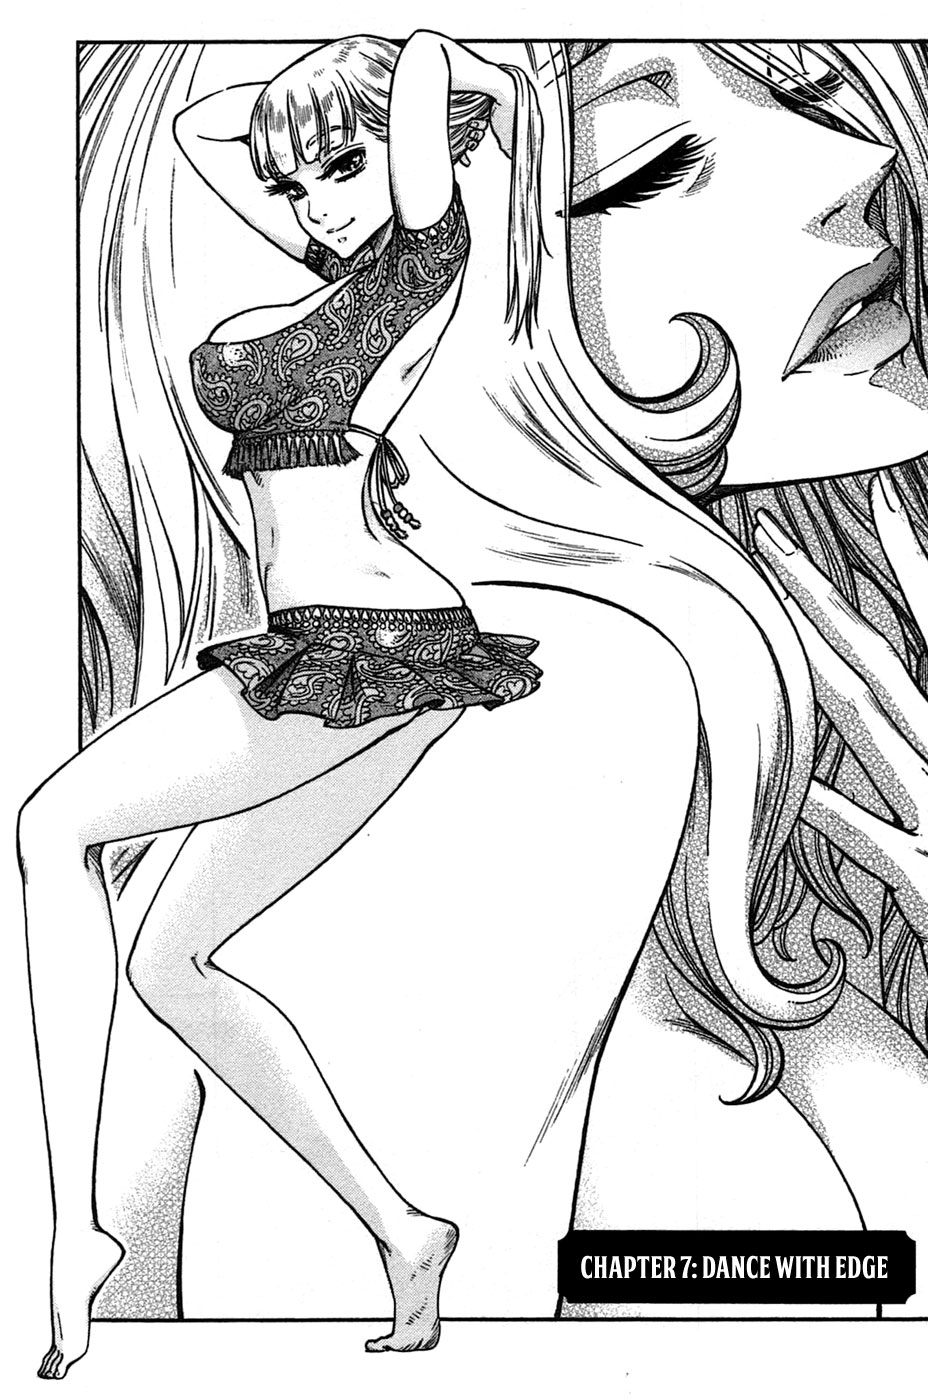 Stravaganza - Isai No Hime Vol.1 Chapter 7: Dance With Edge - Picture 3